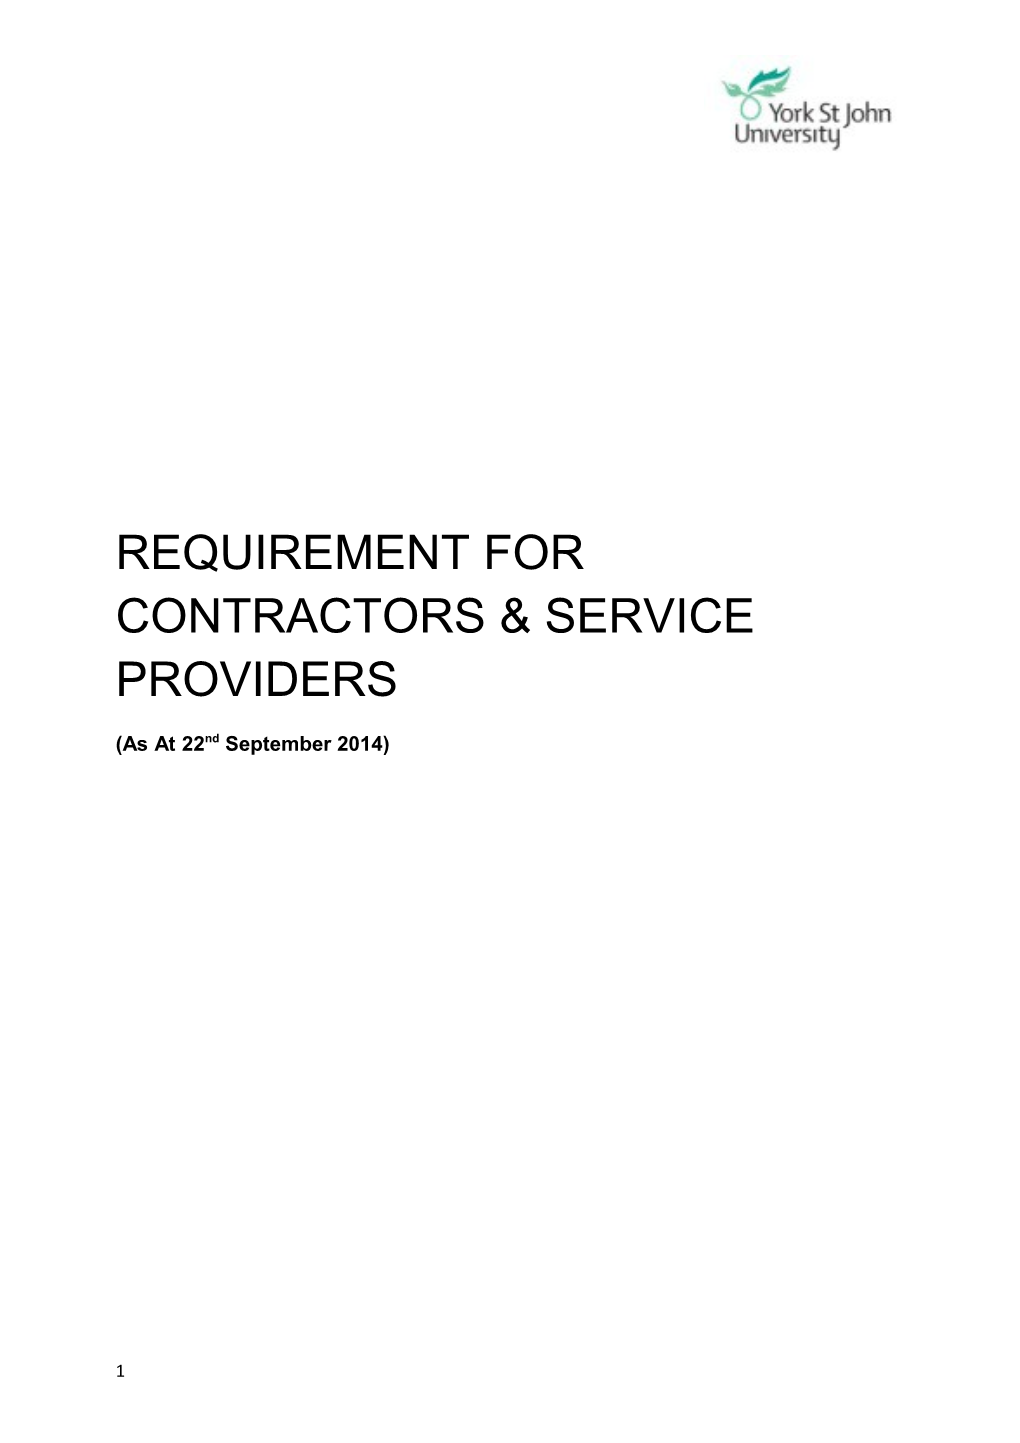 Requirement for Contractors & Service Providers